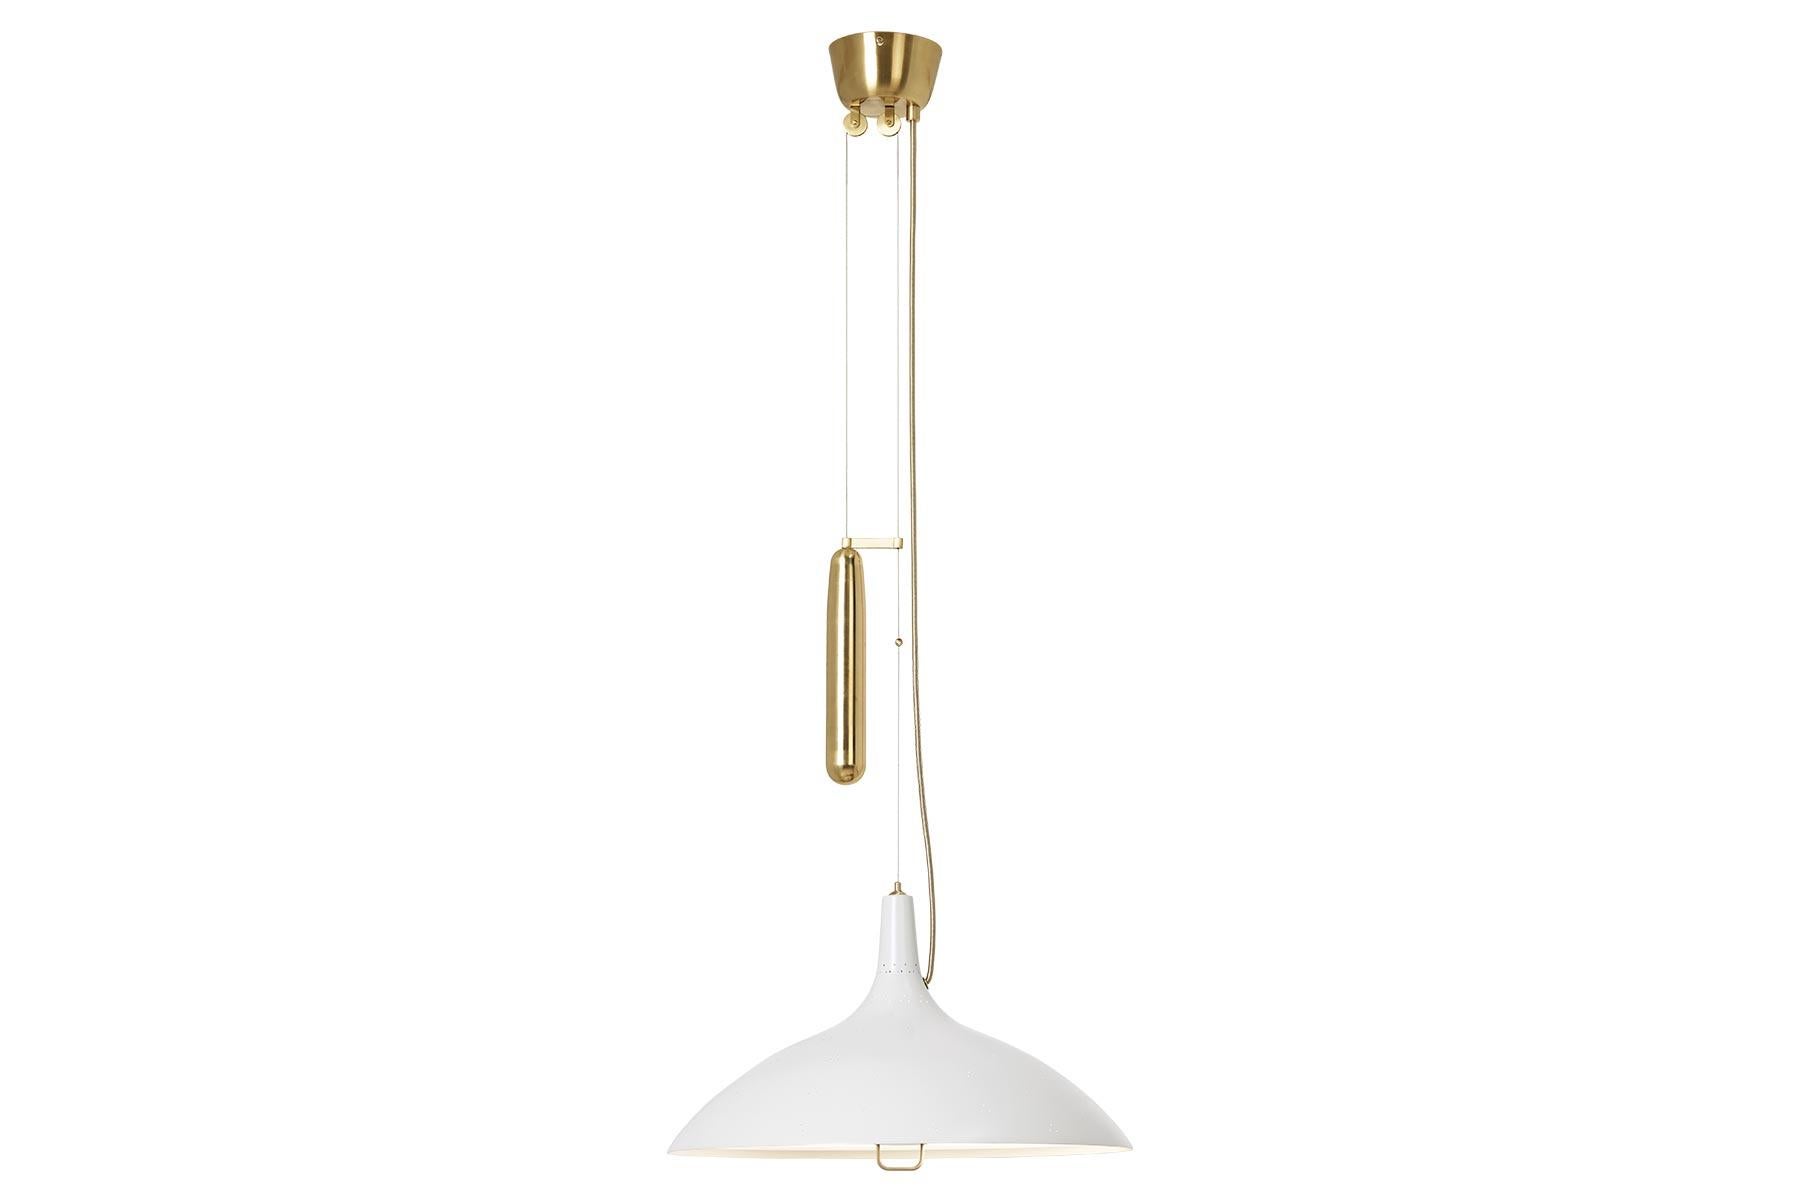 Unveiled in 1947 at the Finland House in New York, the A1965 Pendant was an instant success for Paavo Tynell and one of the lighting fixtures considered to define his mid-century peak. It delicately holds some of his most distinctive design traits;